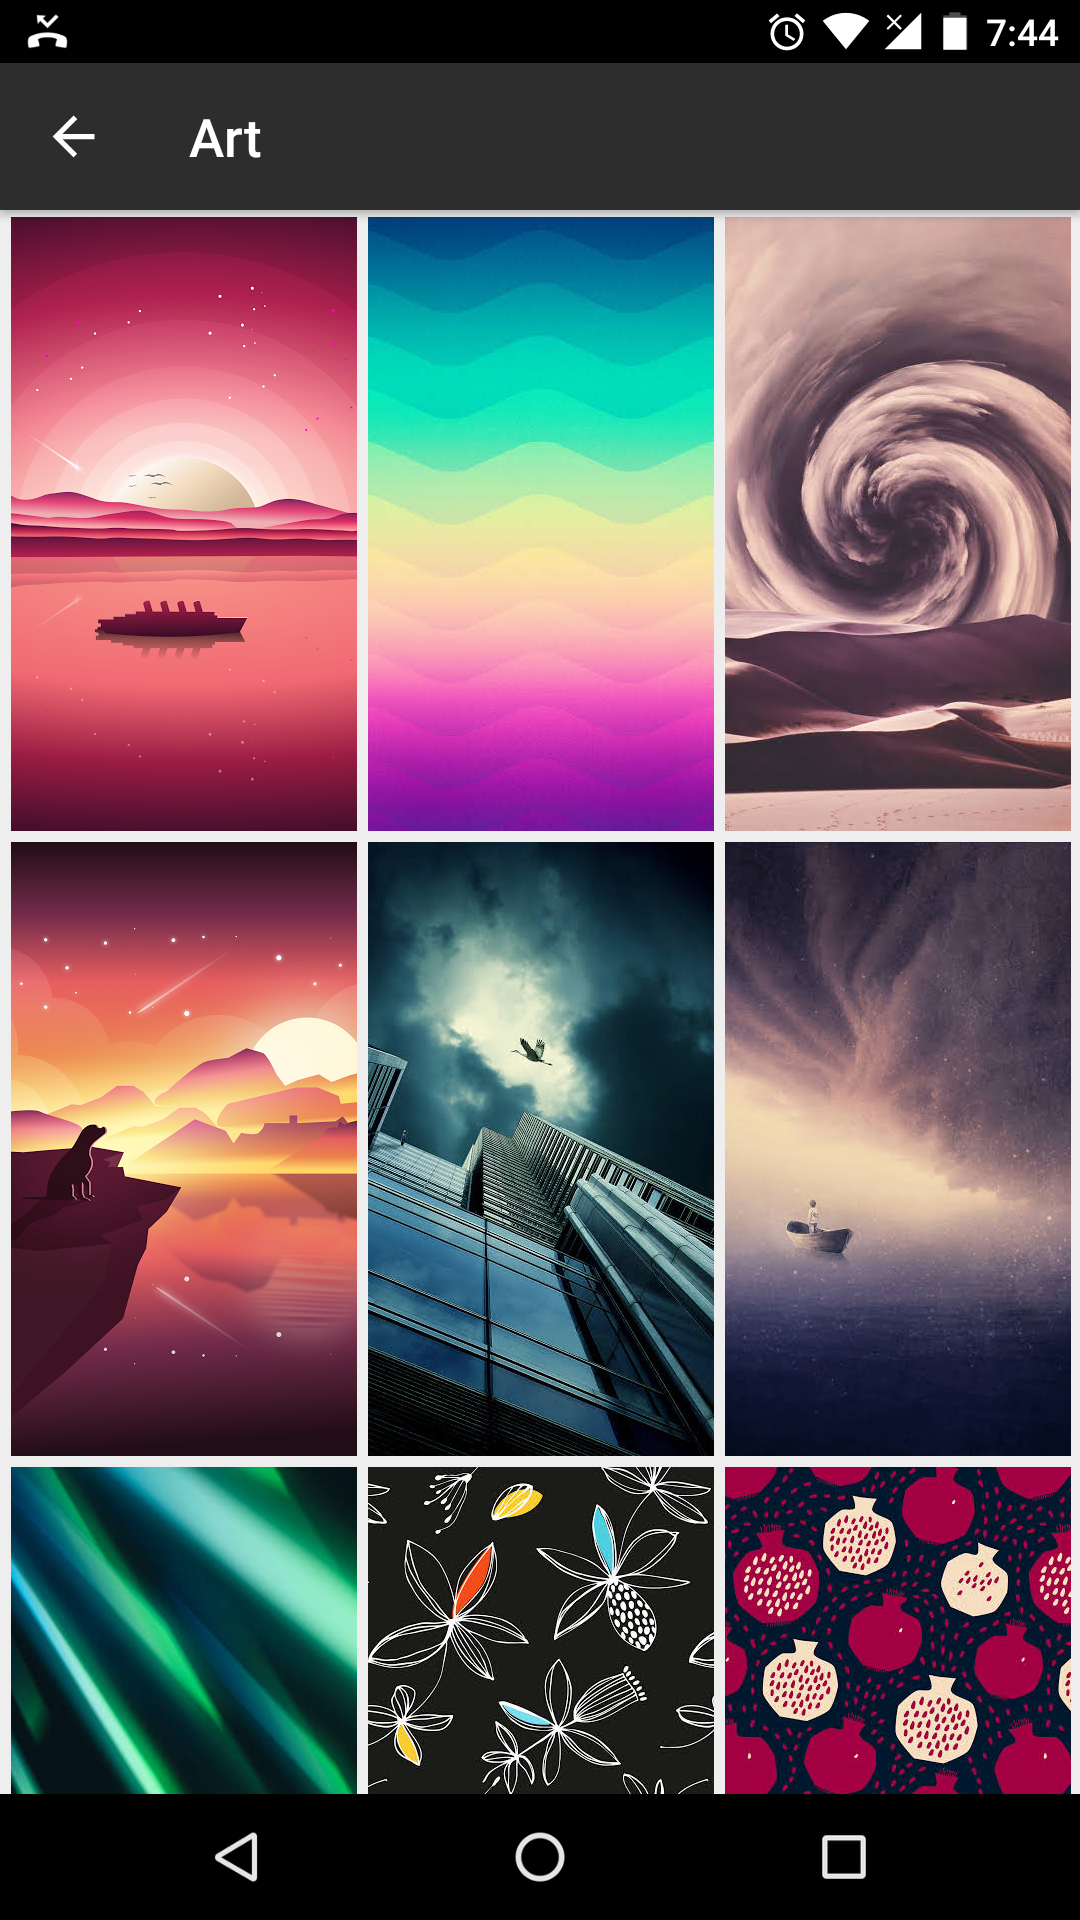 Google Wallpapers Now Offers New Categories, More New - Google Wallpaper Art , HD Wallpaper & Backgrounds